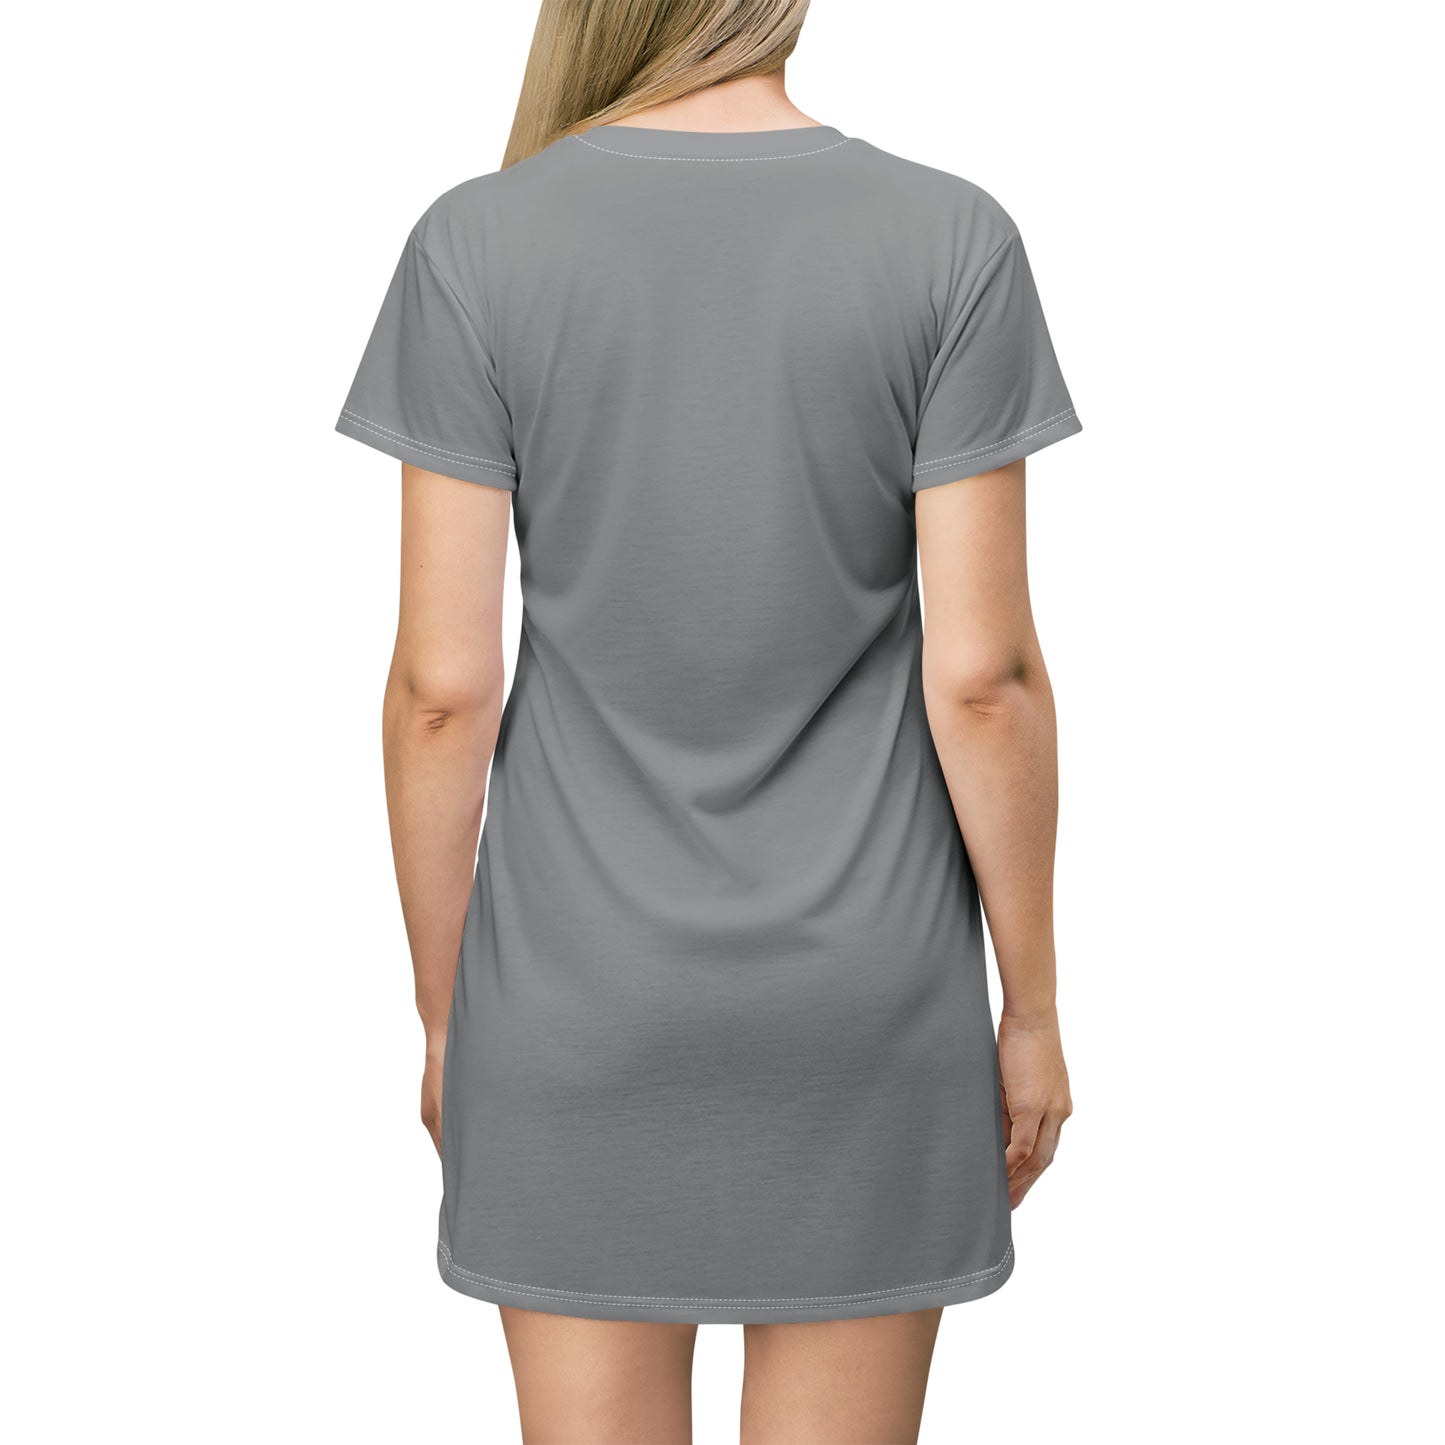 Mom Life - Mothers Day T-Shirt Dress